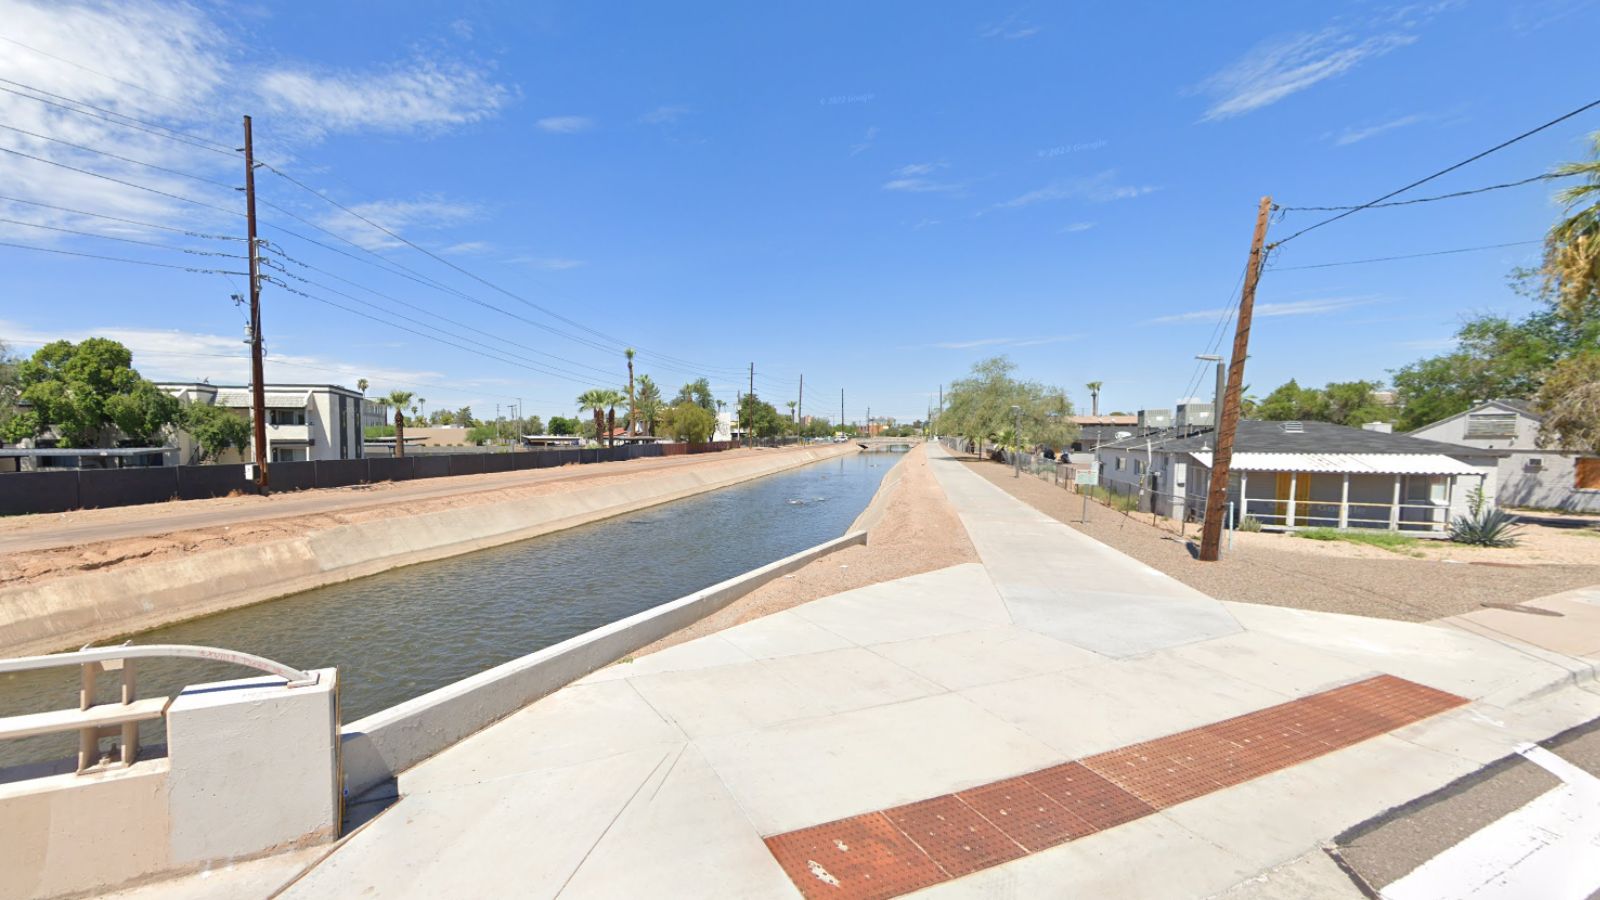 phoenix police asked public to find homicide suspect after dead body found in canal...